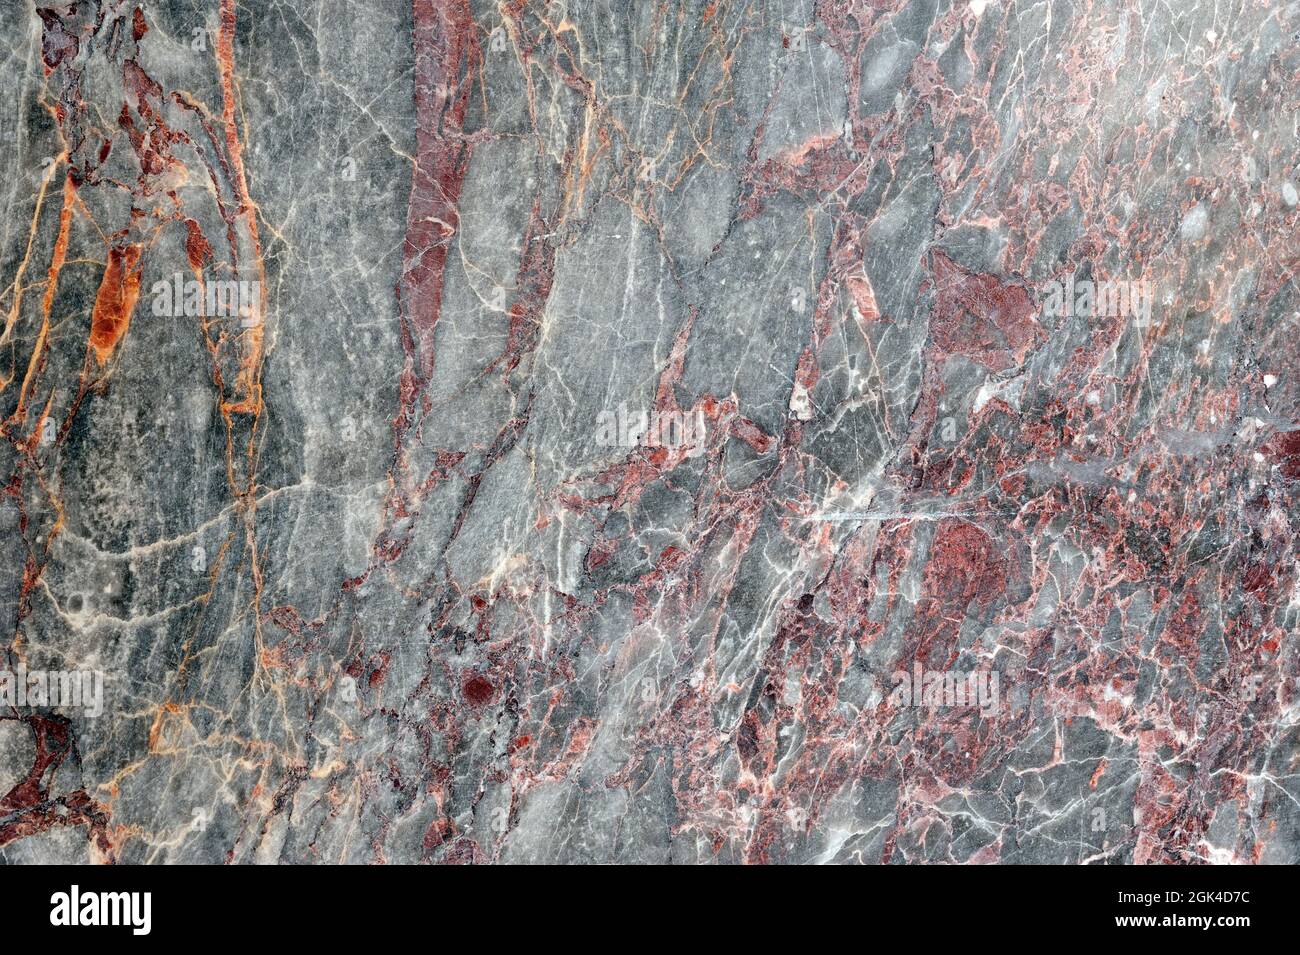 marble - rock,decoration,brick,stone material,abstract,flooring,tile,wall - building feature,backgrounds,material,block shape,architecture,design,no p Stock Photo